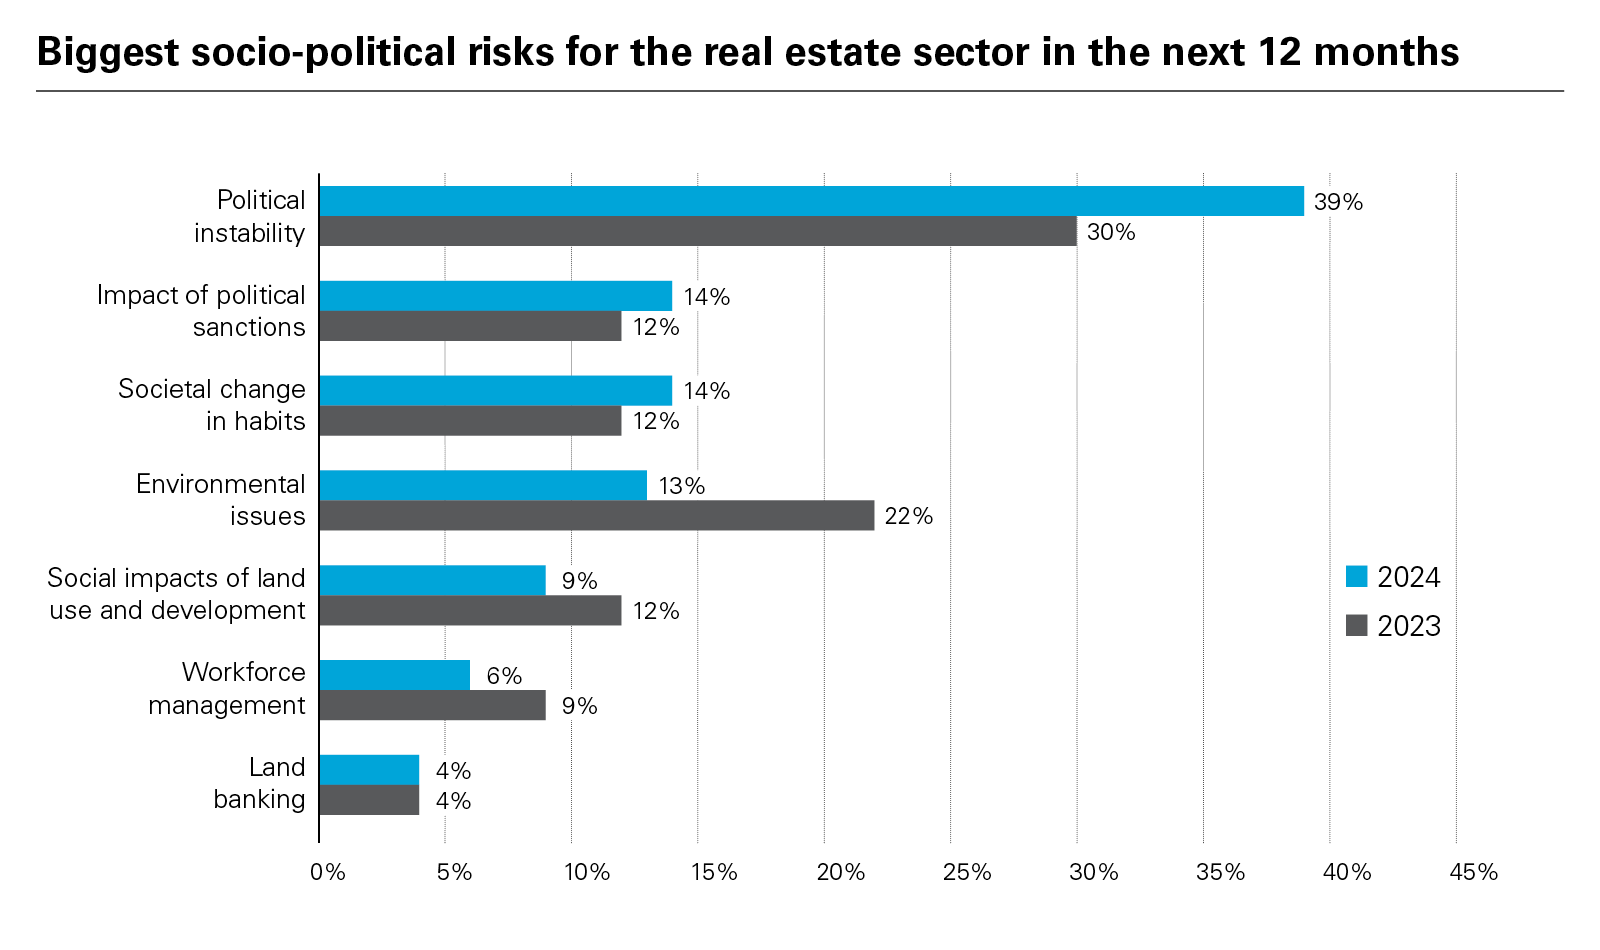 Biggest socio-political risks for the real estate sector in the next 12 months